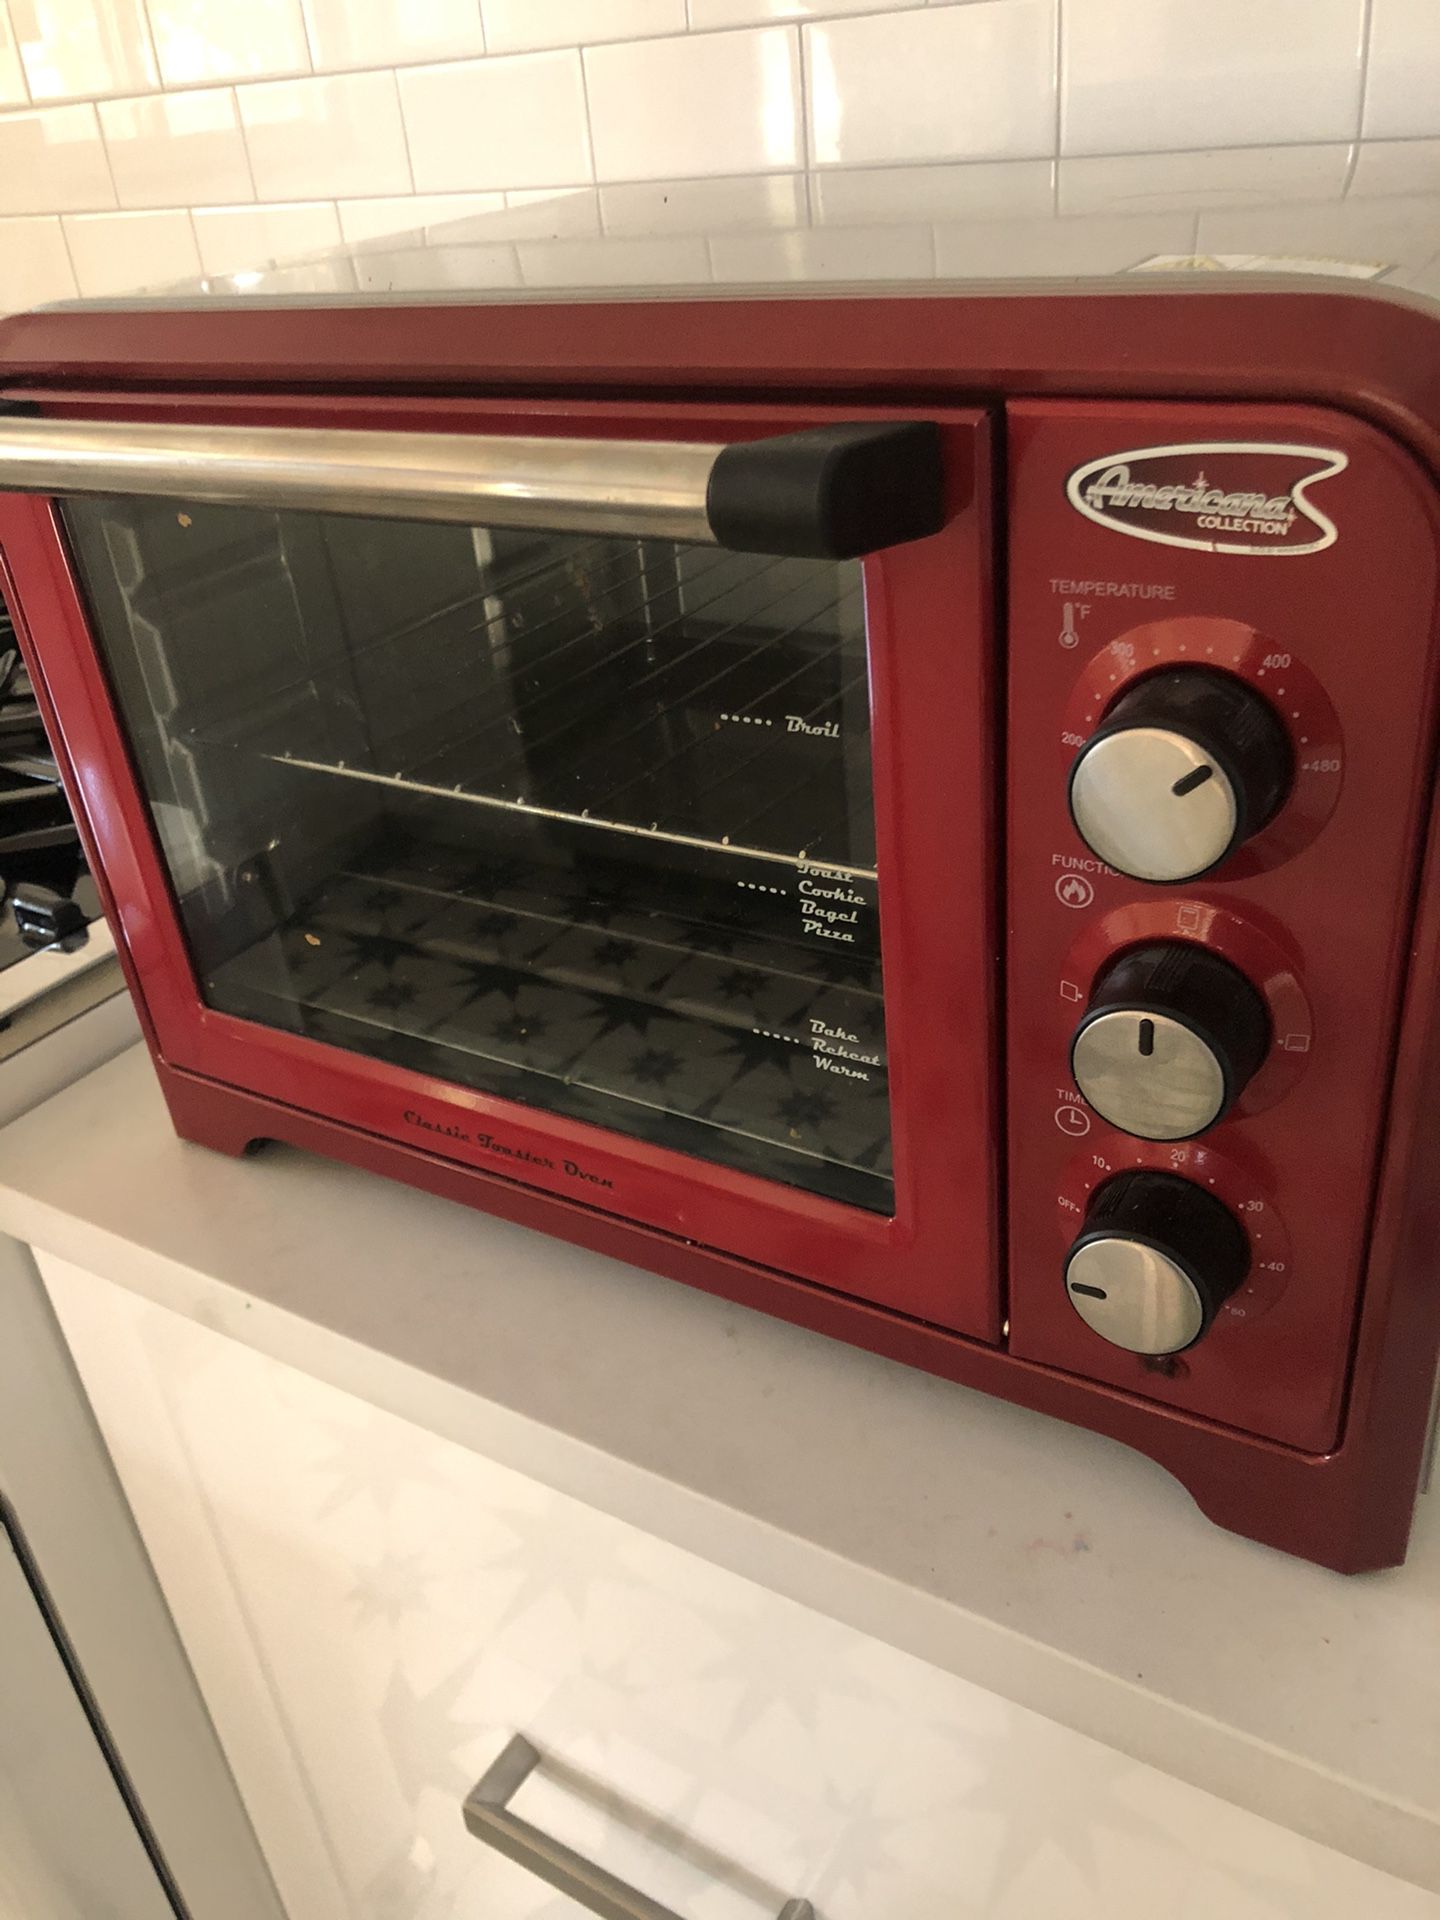 Groovy Retro inspired Toaster oven